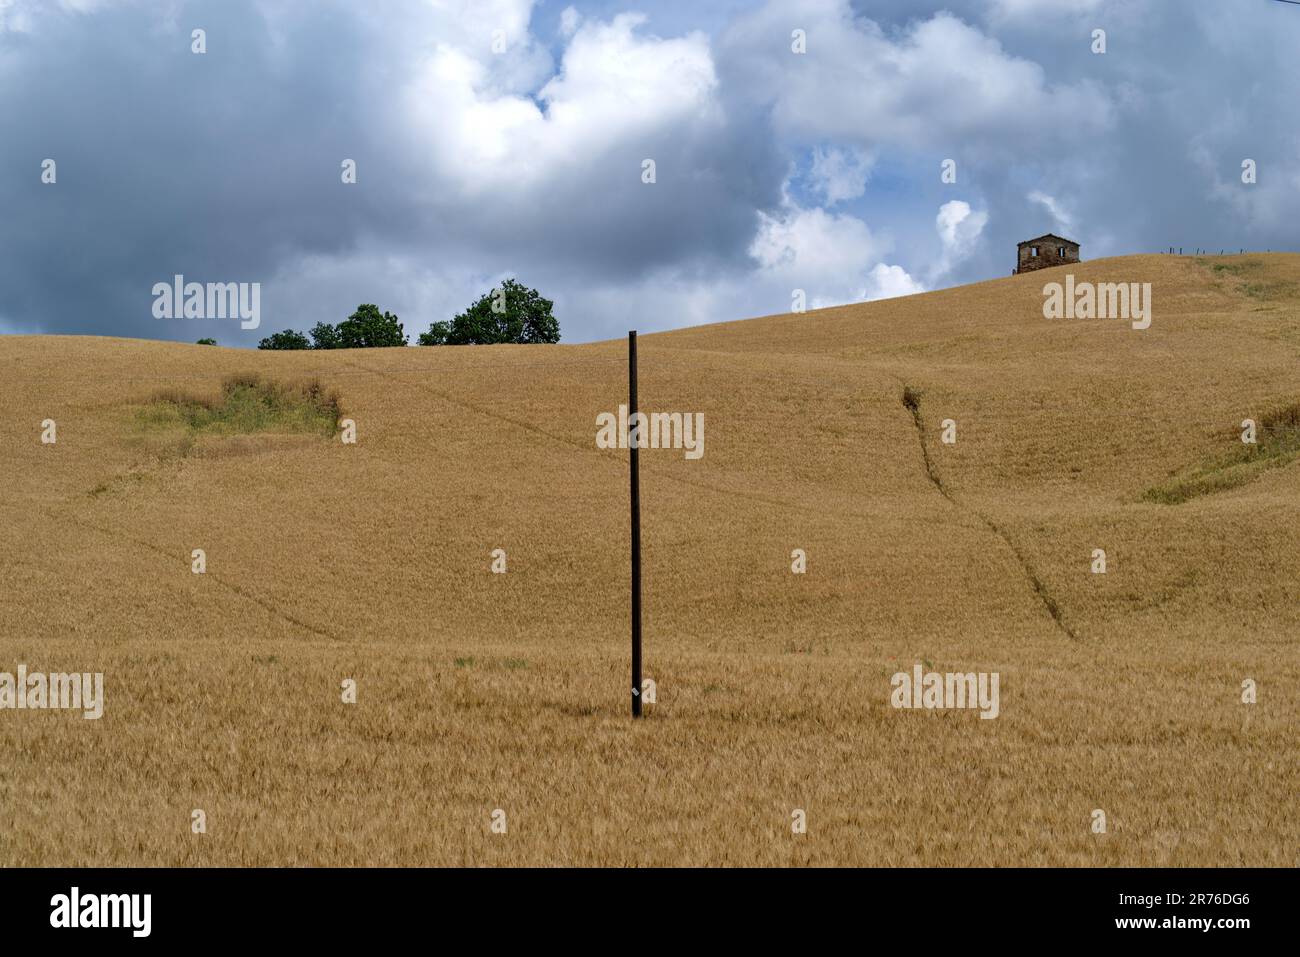 telephone line pole in the middle of a field of ripe corn Stock Photo